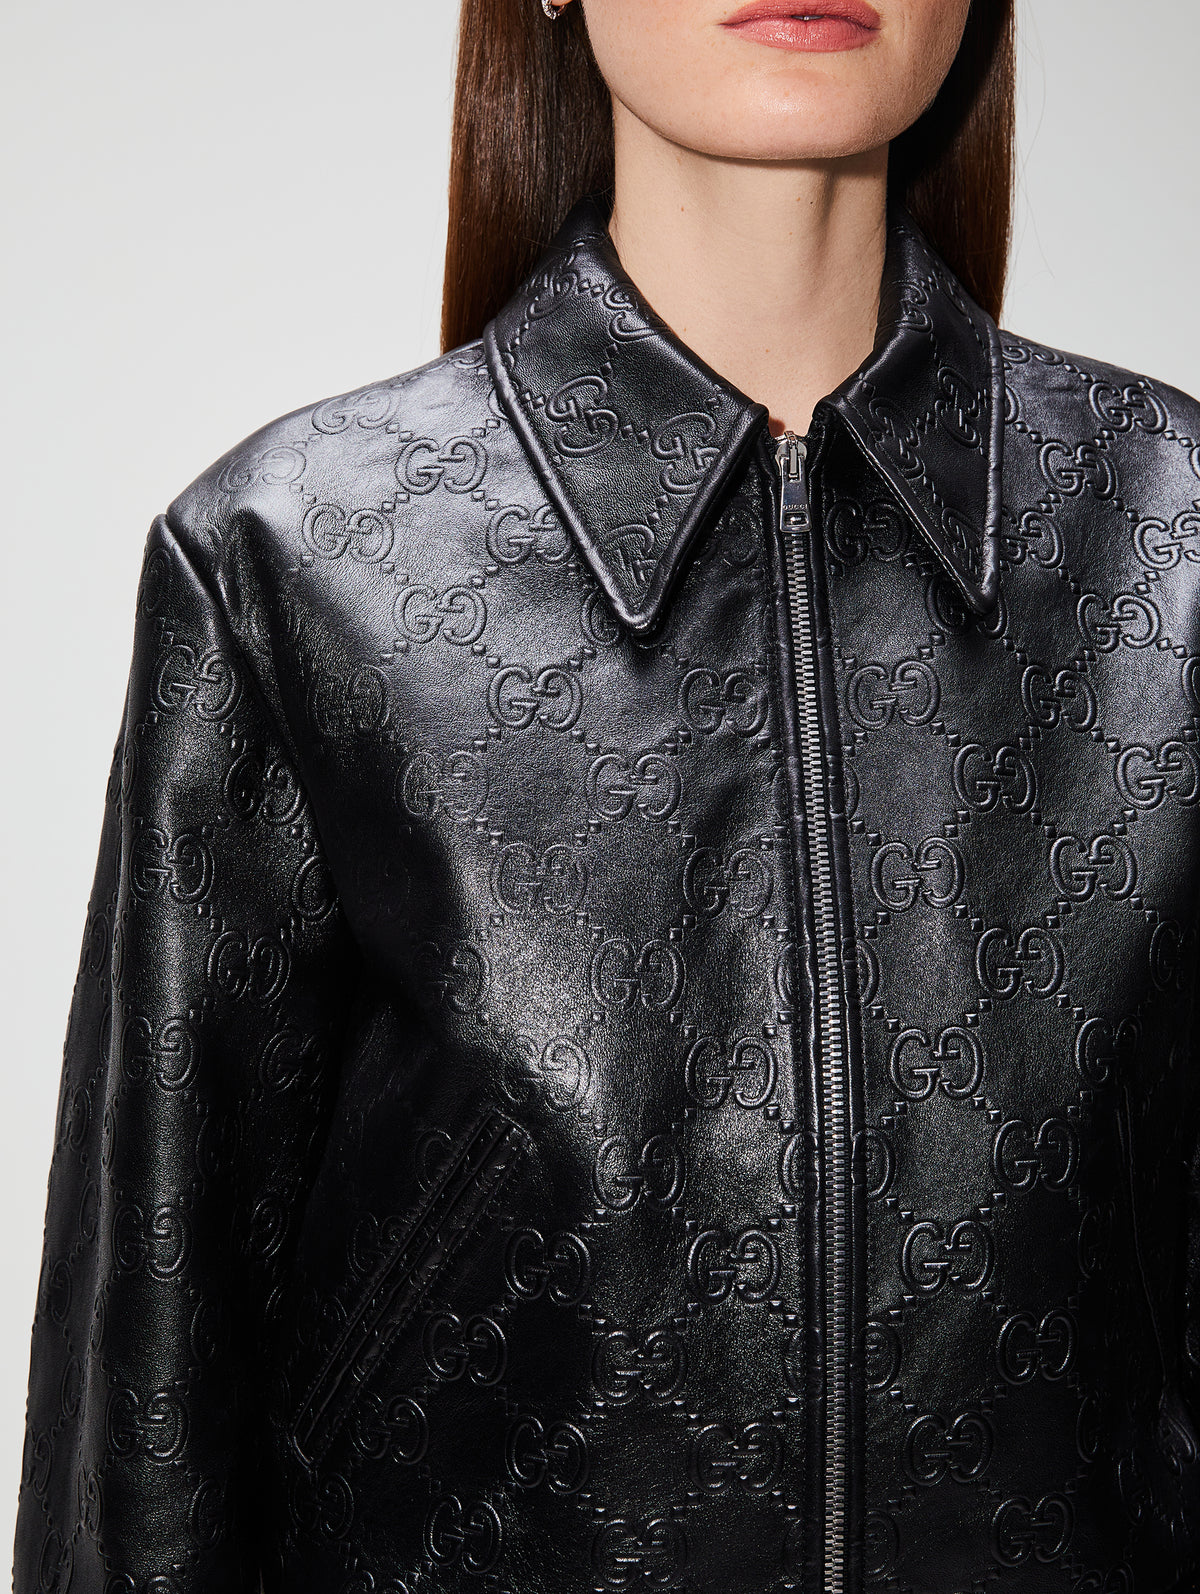 Gucci Embossed GG Leather Bomber Jacket